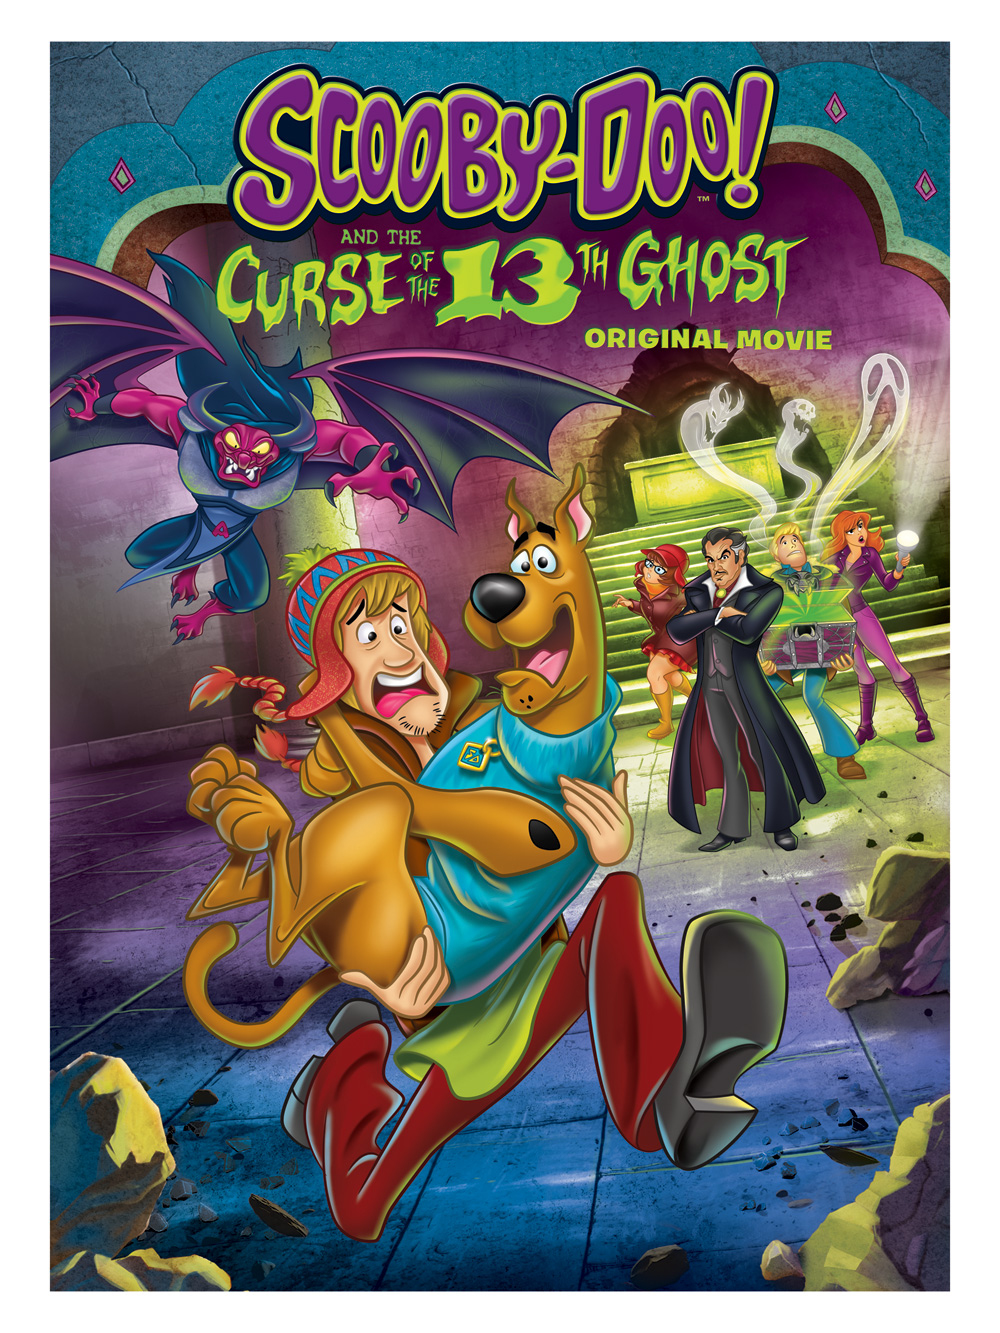 Stiahni si Filmy s titulkama Scooby-Doo! and the Curse of the 13th Ghost (2019) CZ titulky = CSFD 74%